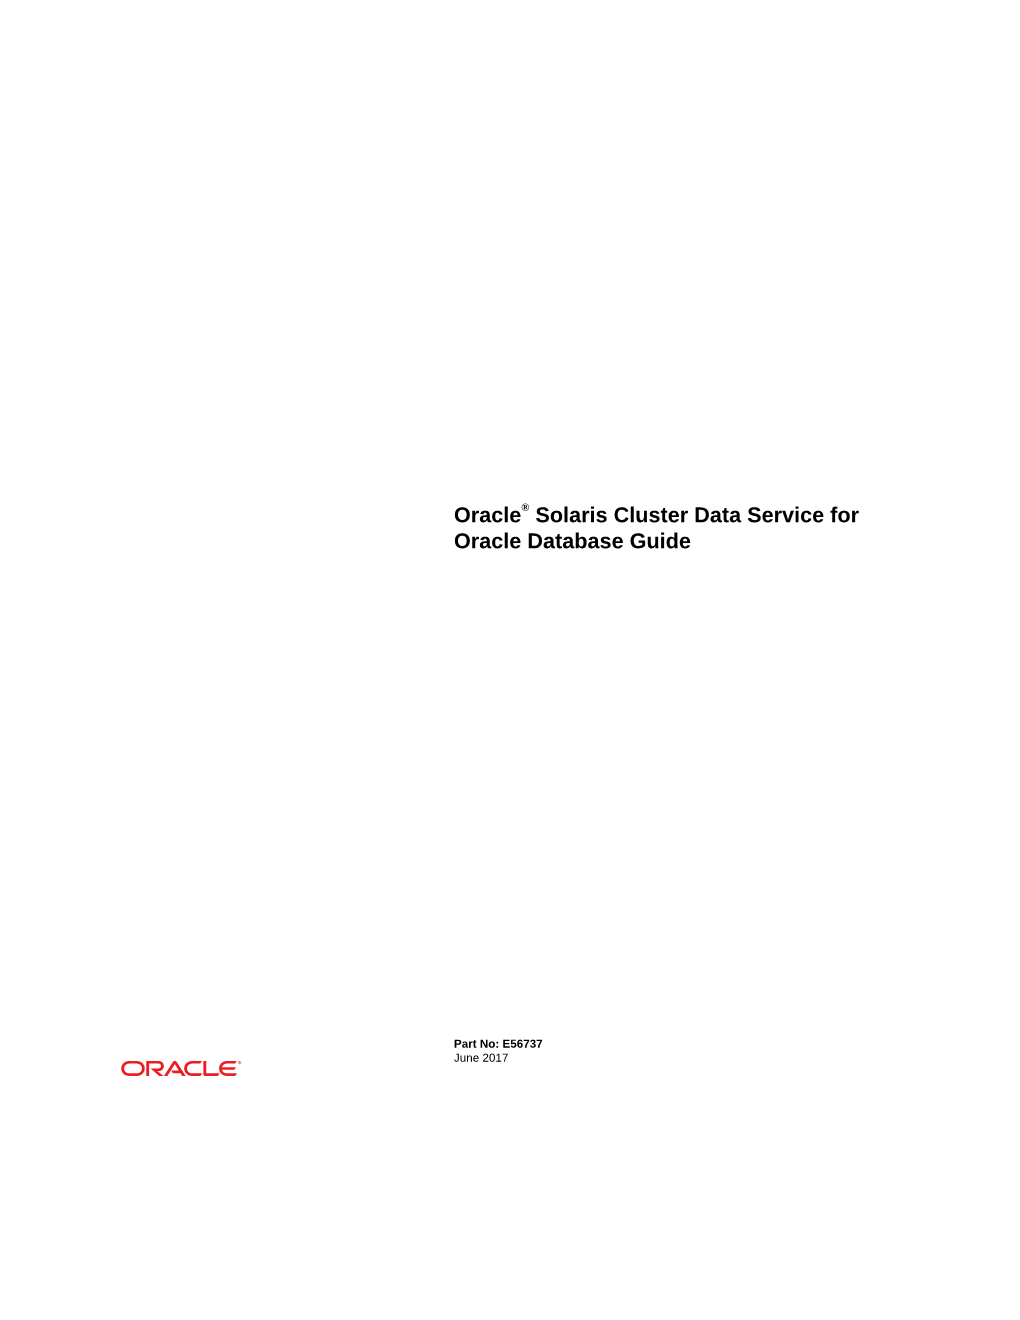 Solaris Cluster Data Service for Oracle Database Guide